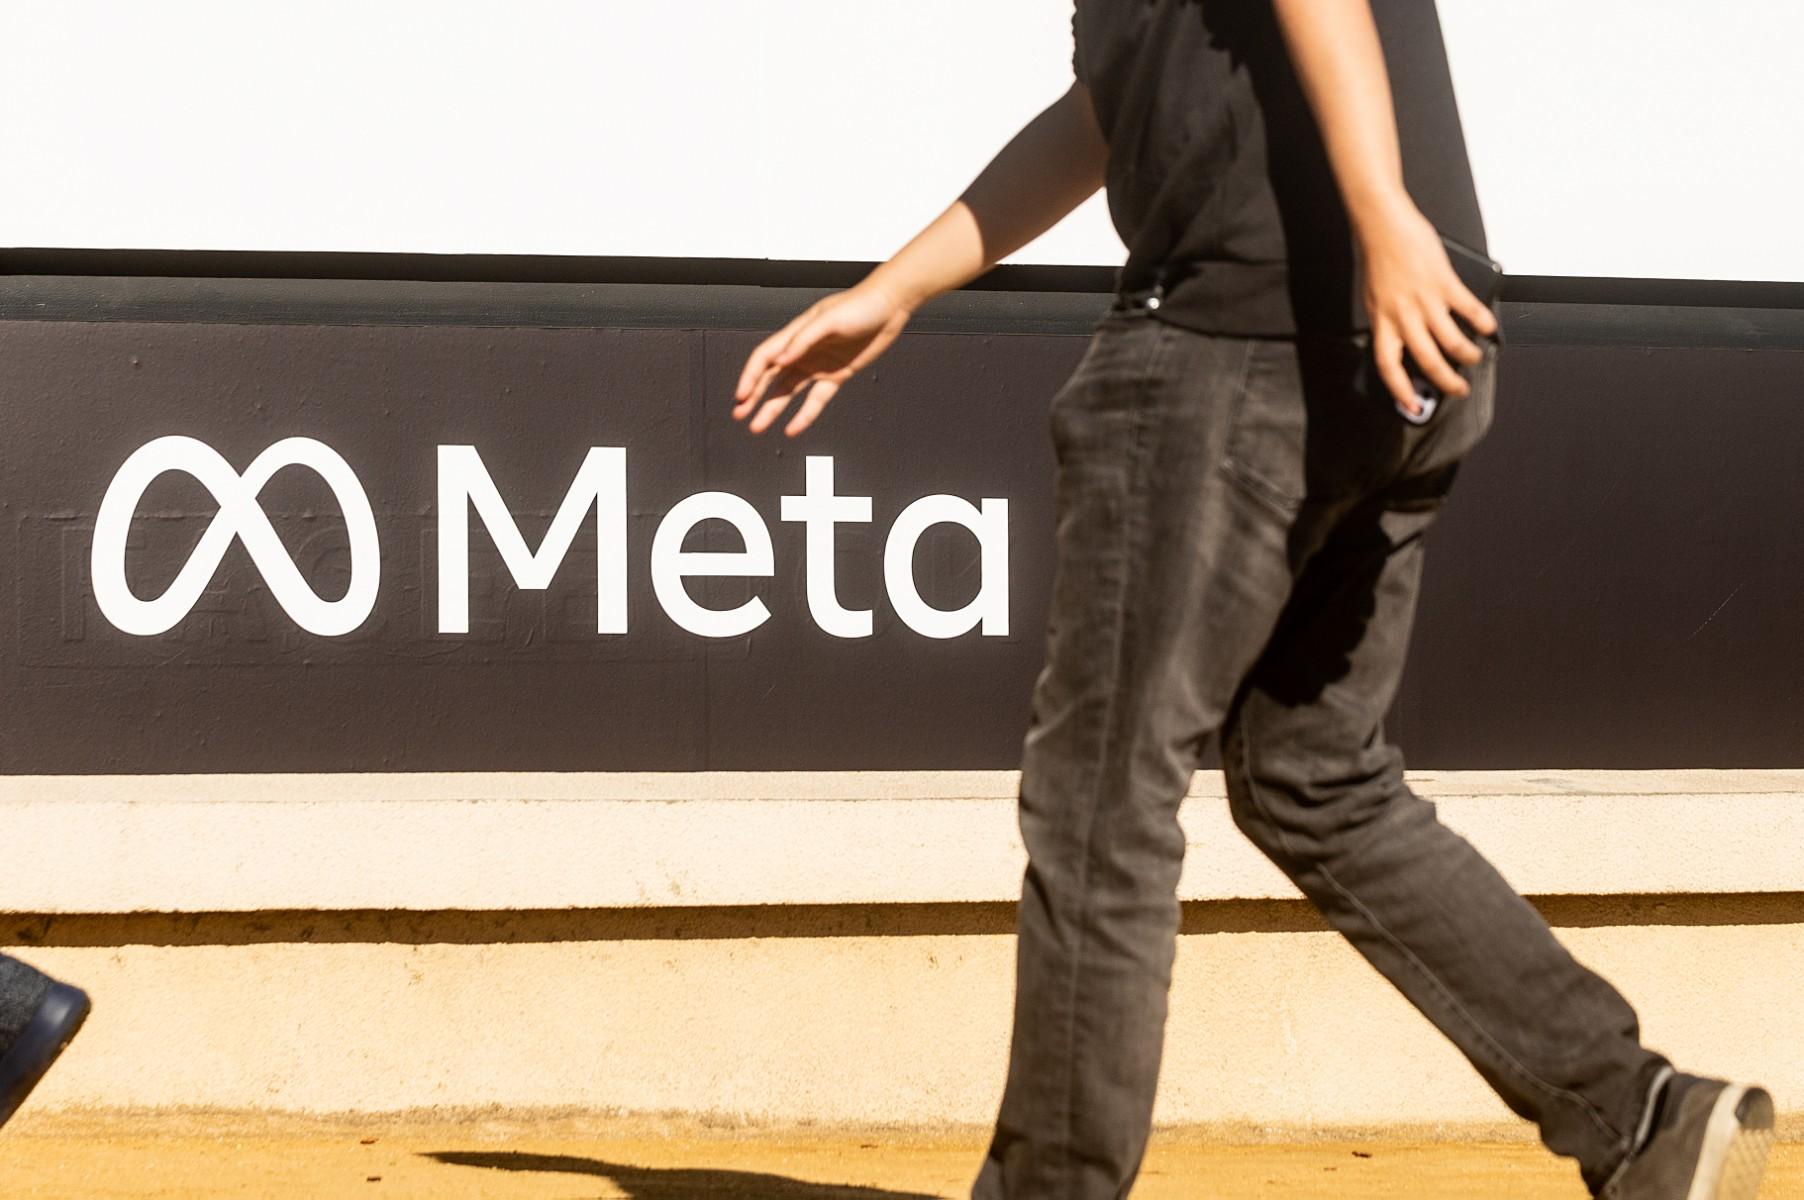 A person walks past a newly unveiled logo for 'Meta', the new name for Facebook's parent company, outside Facebook headquarters in Menlo Park on Oct 28, 2021. The social media company changed its name in October to Meta to reflect its focus on the metaverse, which it thinks will be the successor to the mobile internet. Photo: AFP